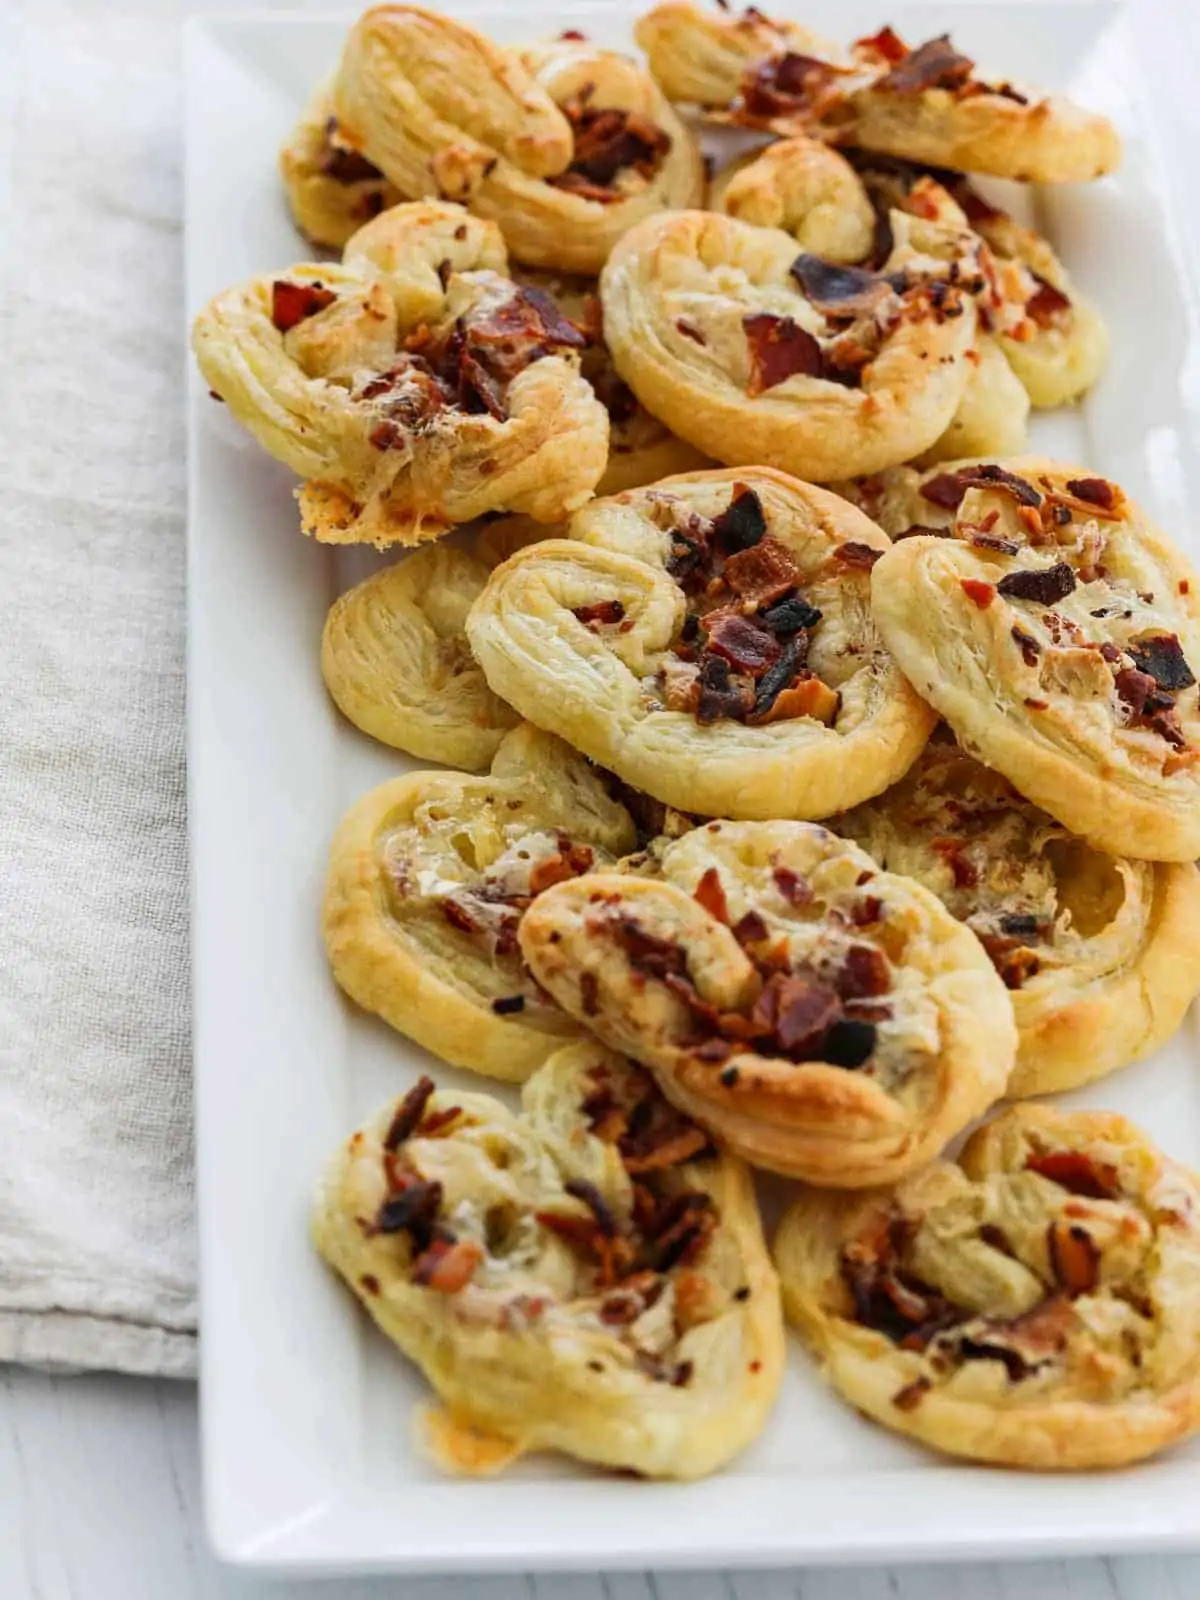 Brie and Bacon Palmiers